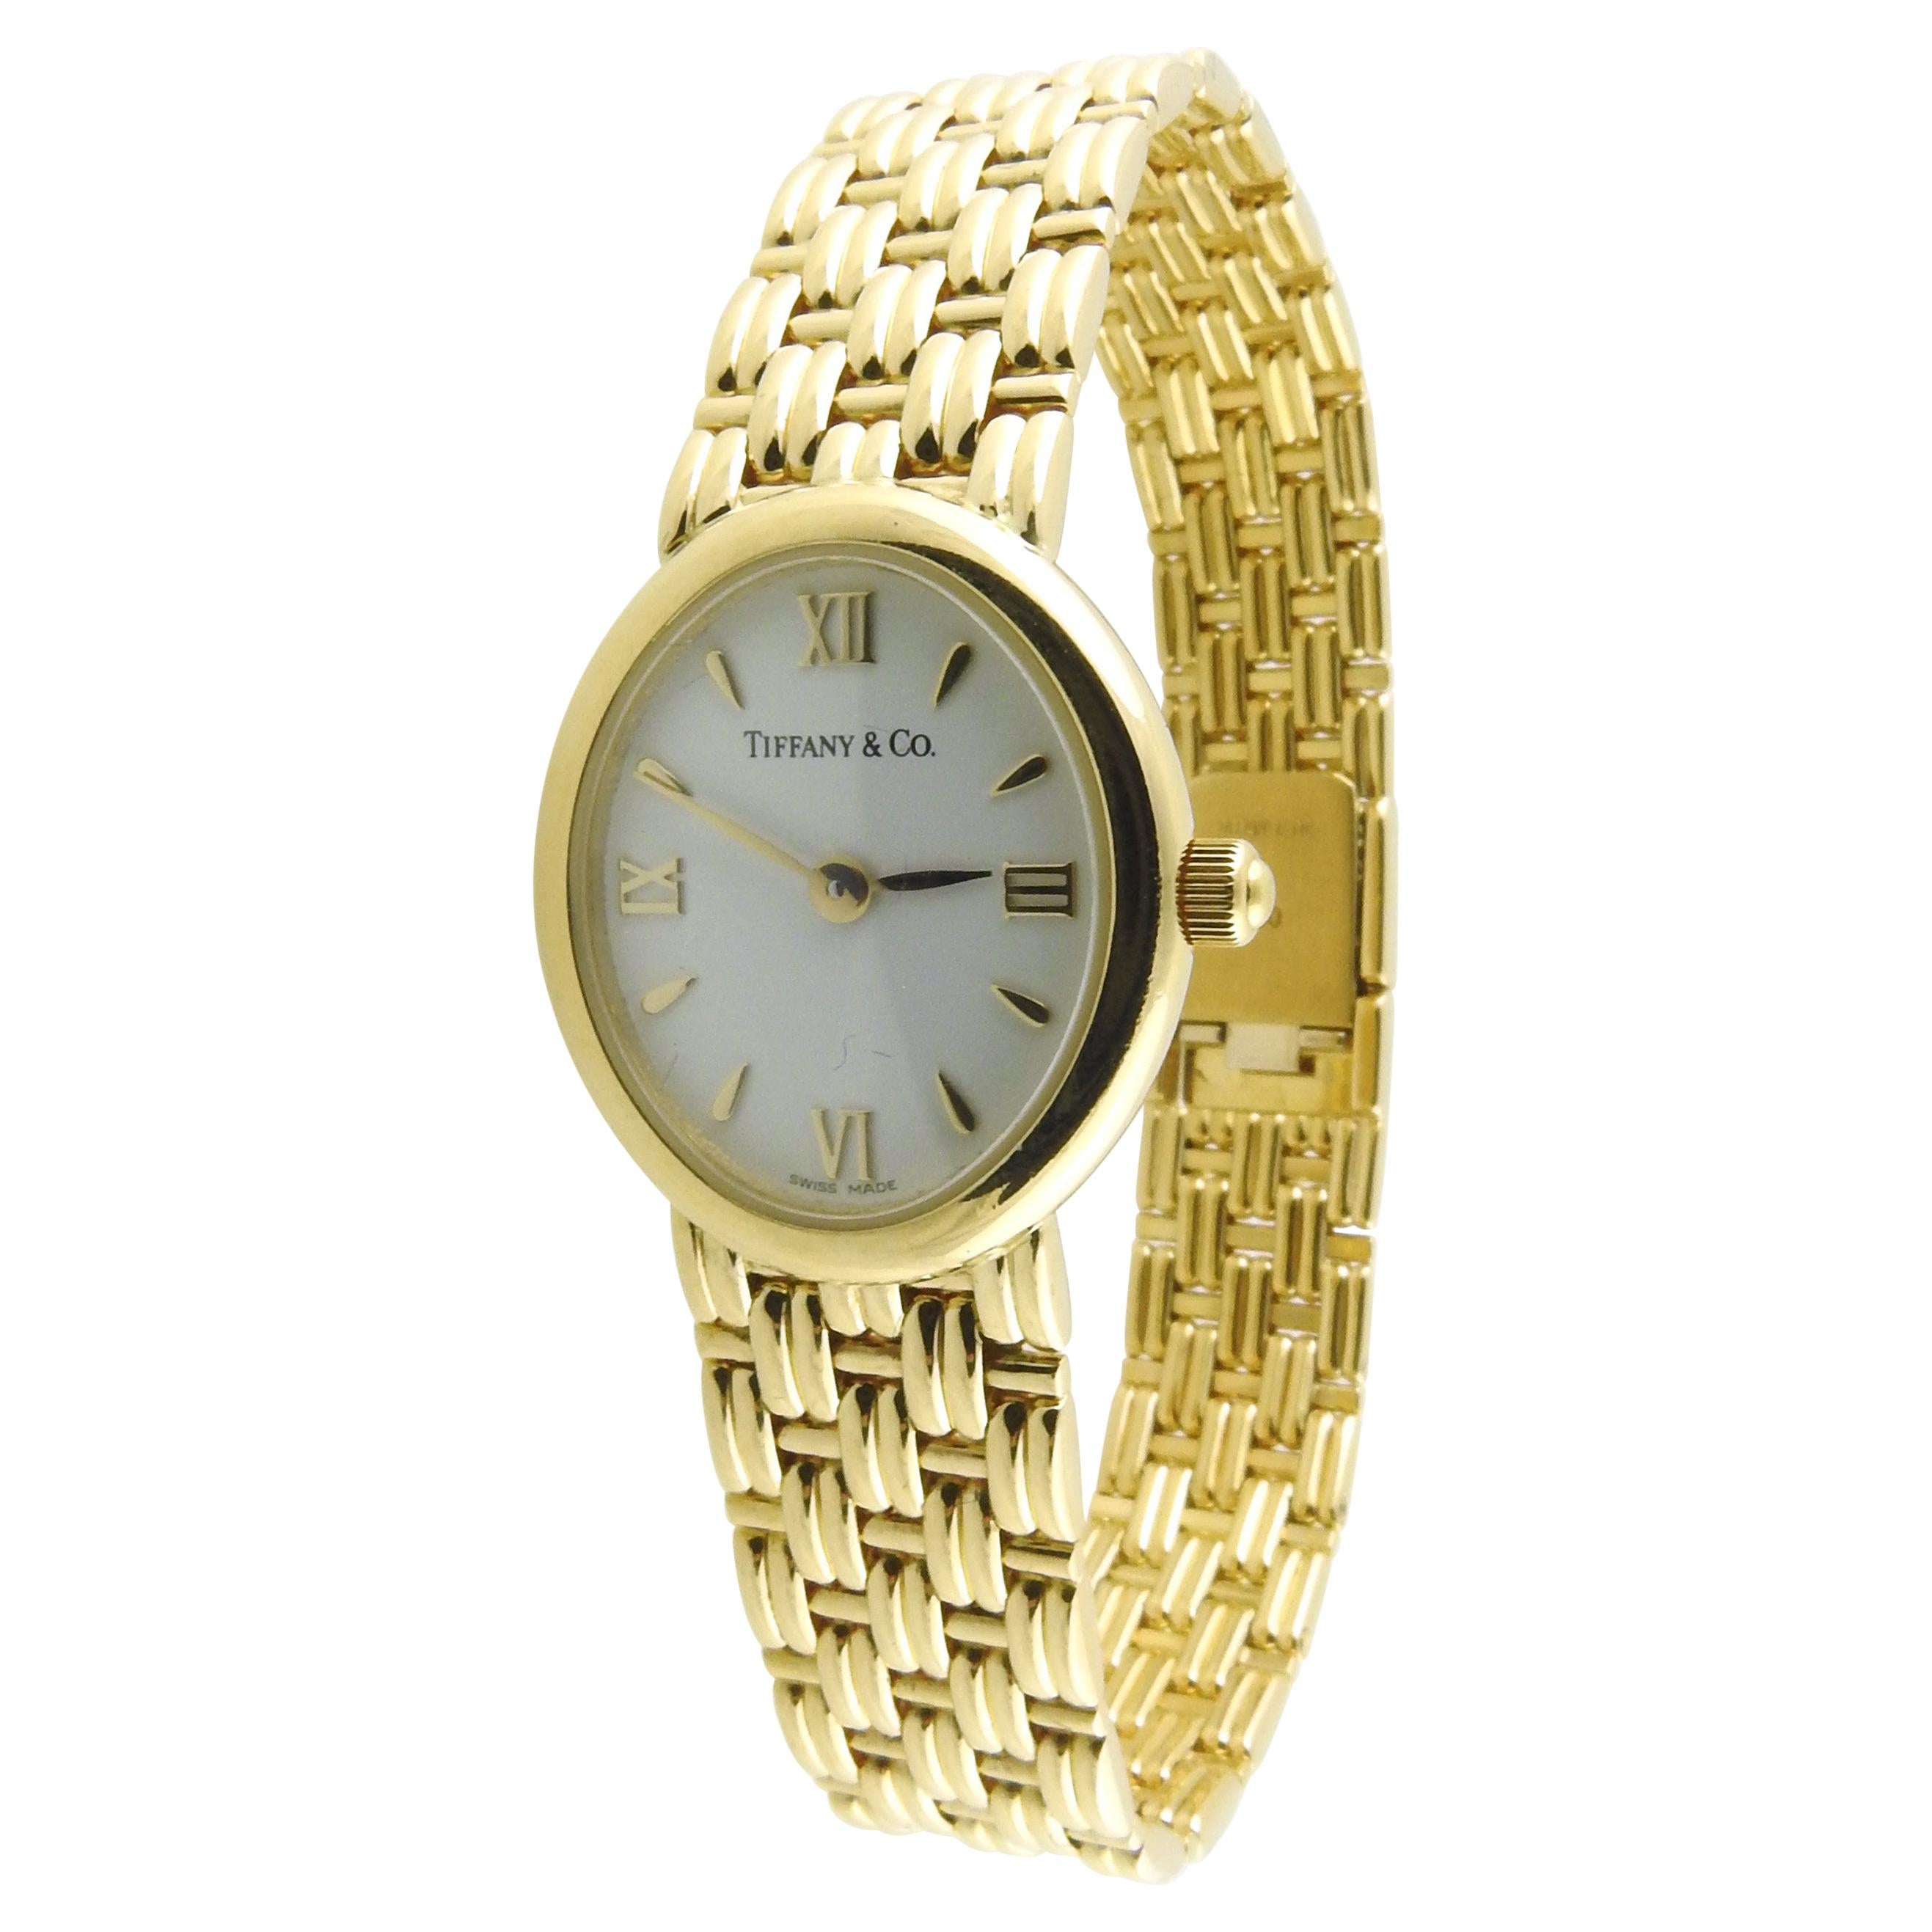 Tiffany & Co. 18k Yellow Gold Ladies Watch White Dial Basket Weave Band